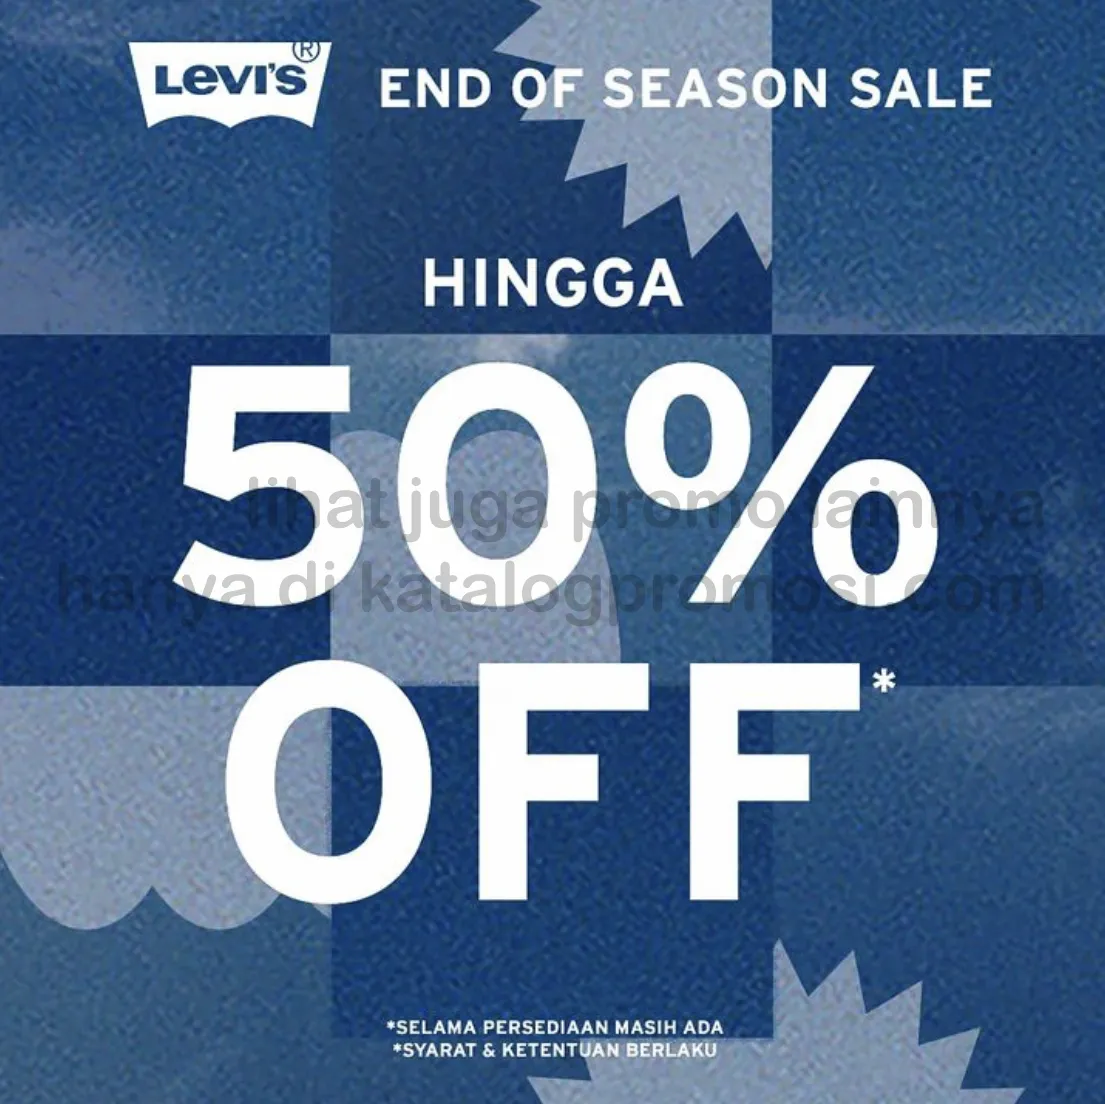 Promo Levi's End Of Season Sale Now Here! Discount up to 50% off